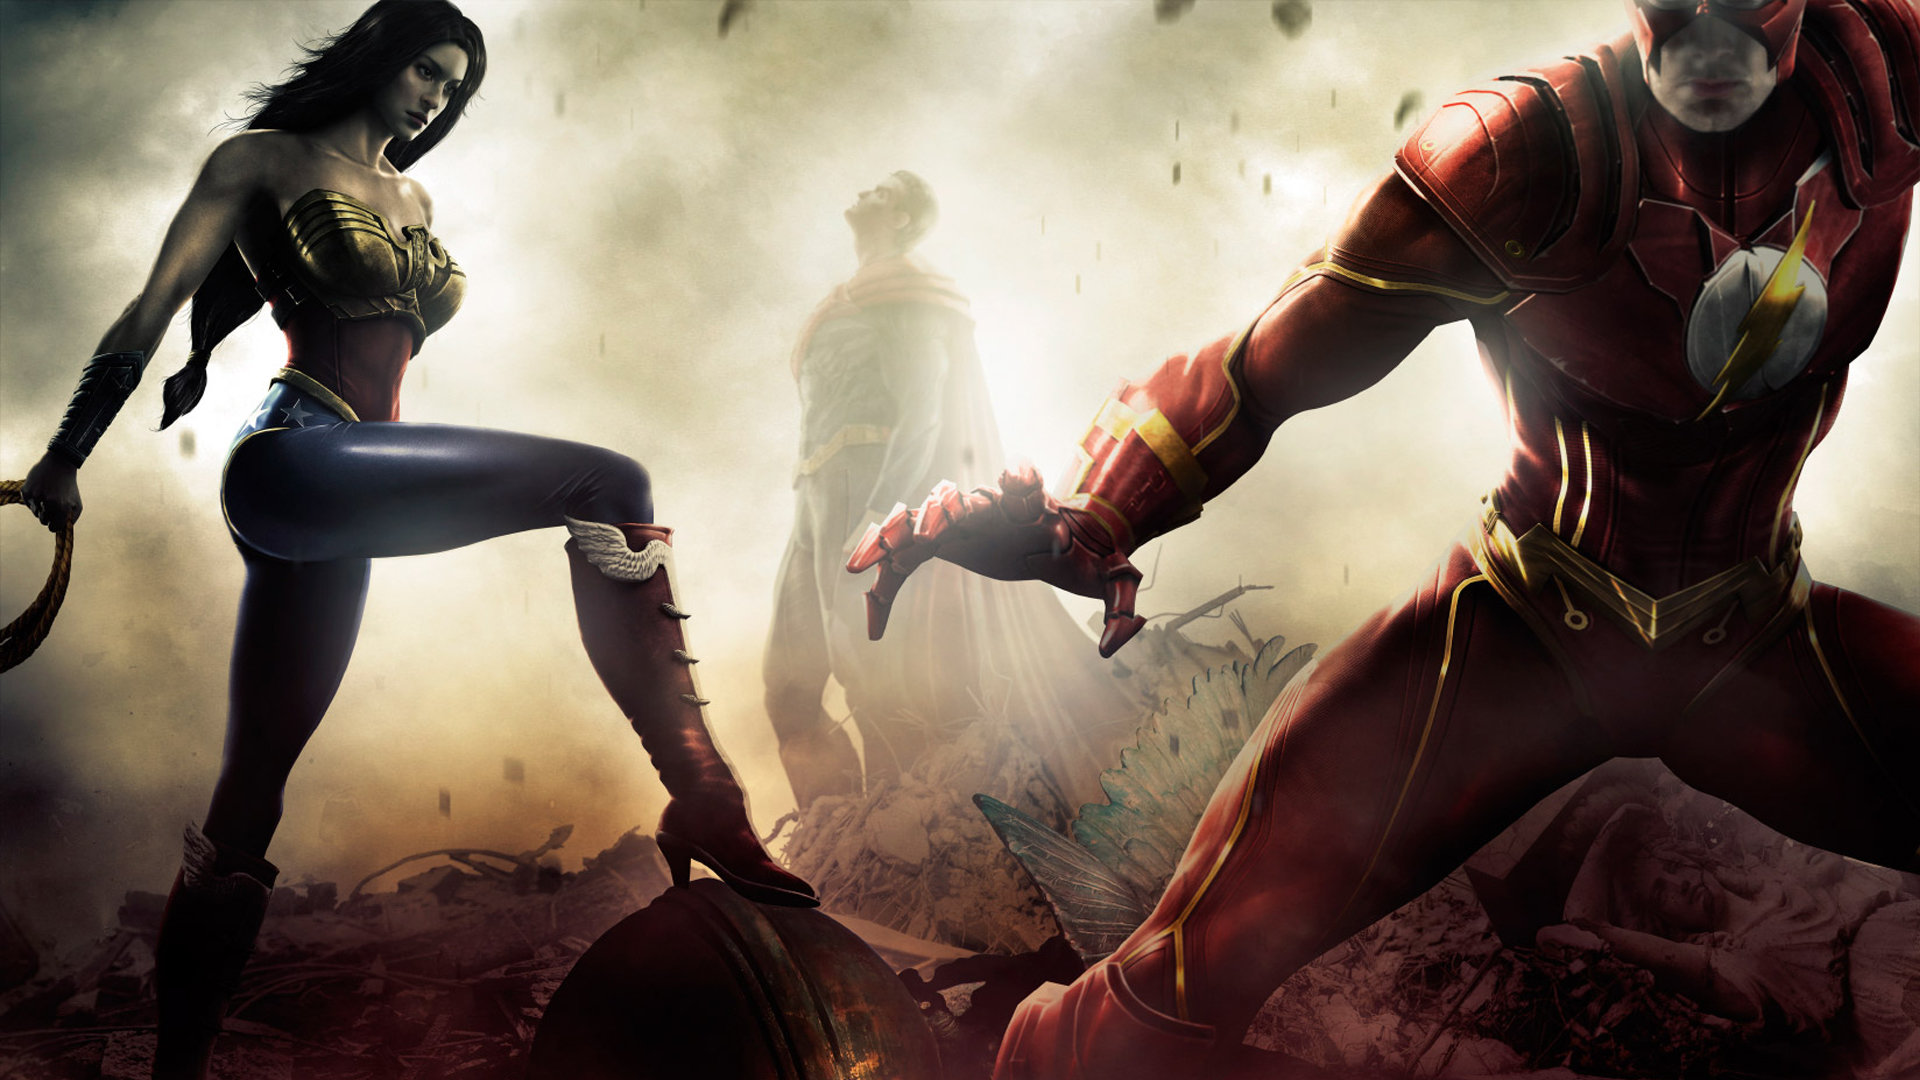 Best Injustice: Gods Among Us wallpaper ID:385179 for High Resolution full hd 1080p computer